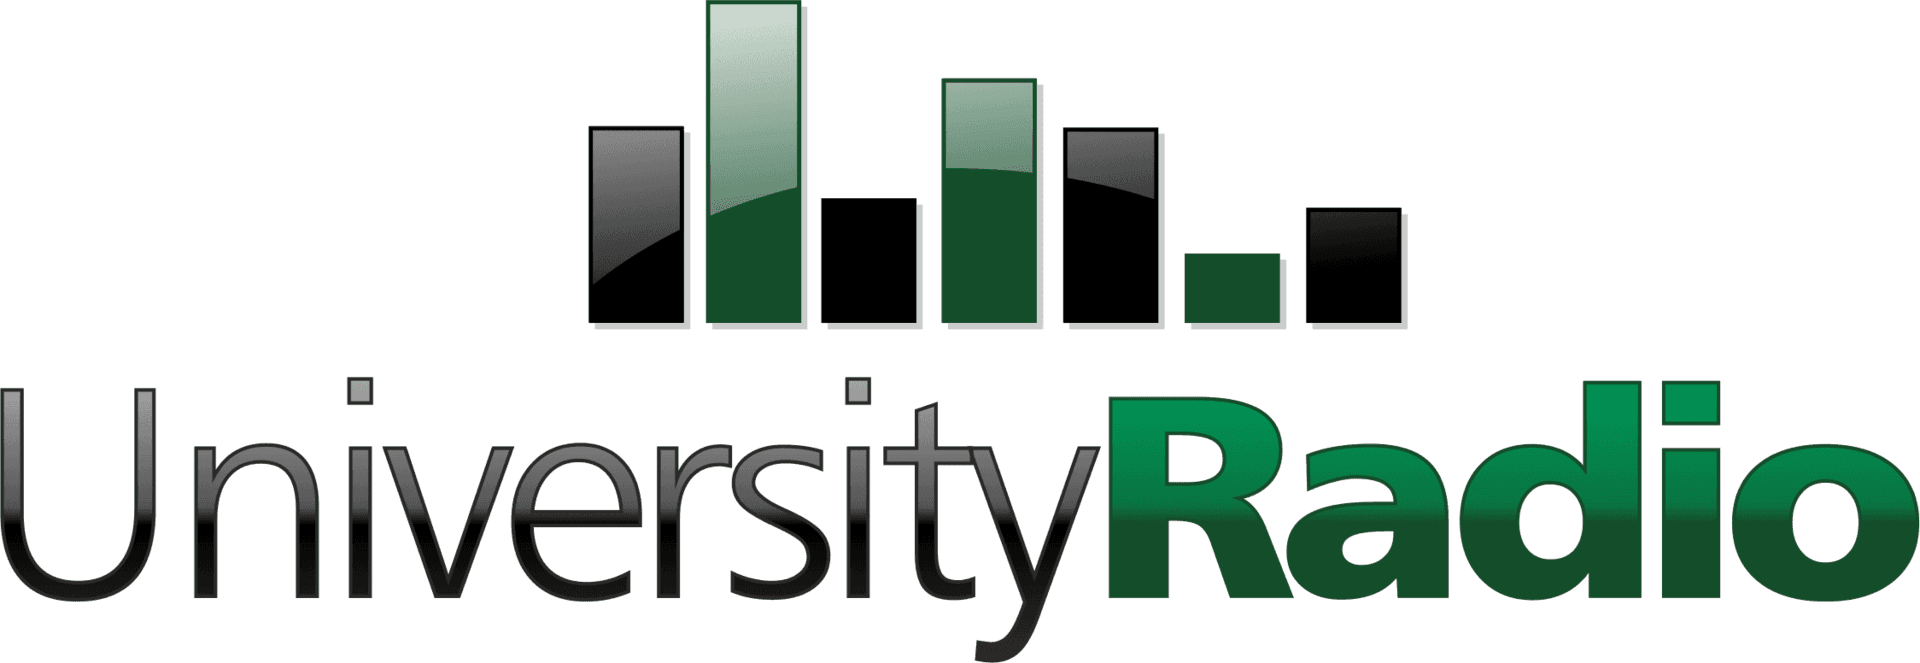 A logo for university radio with a graph on it